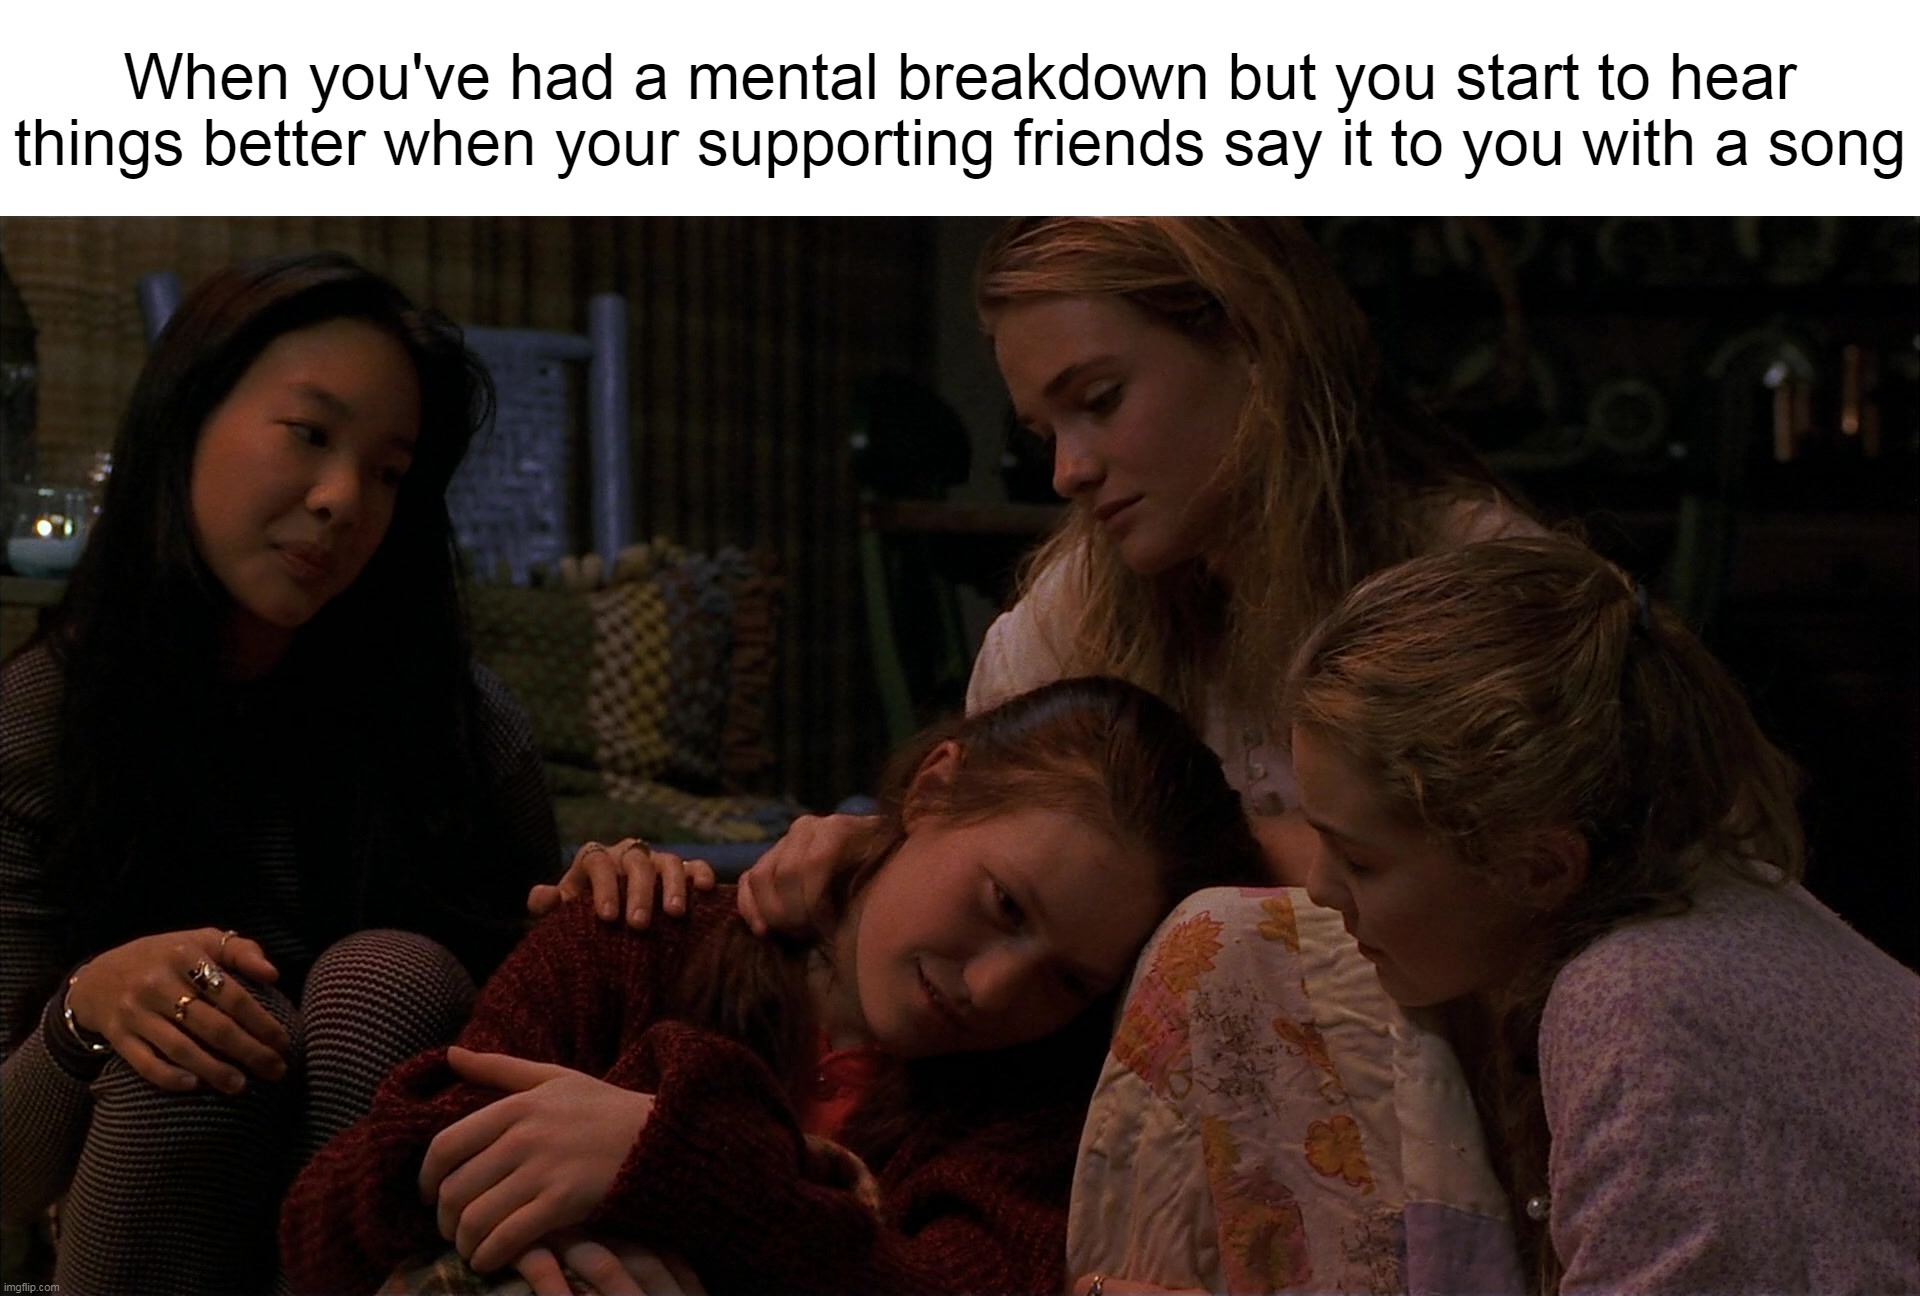 When you've had a mental breakdown but you start to hear things better when your supporting friends say it to you with a song | image tagged in meme,memes,humor,relatable | made w/ Imgflip meme maker